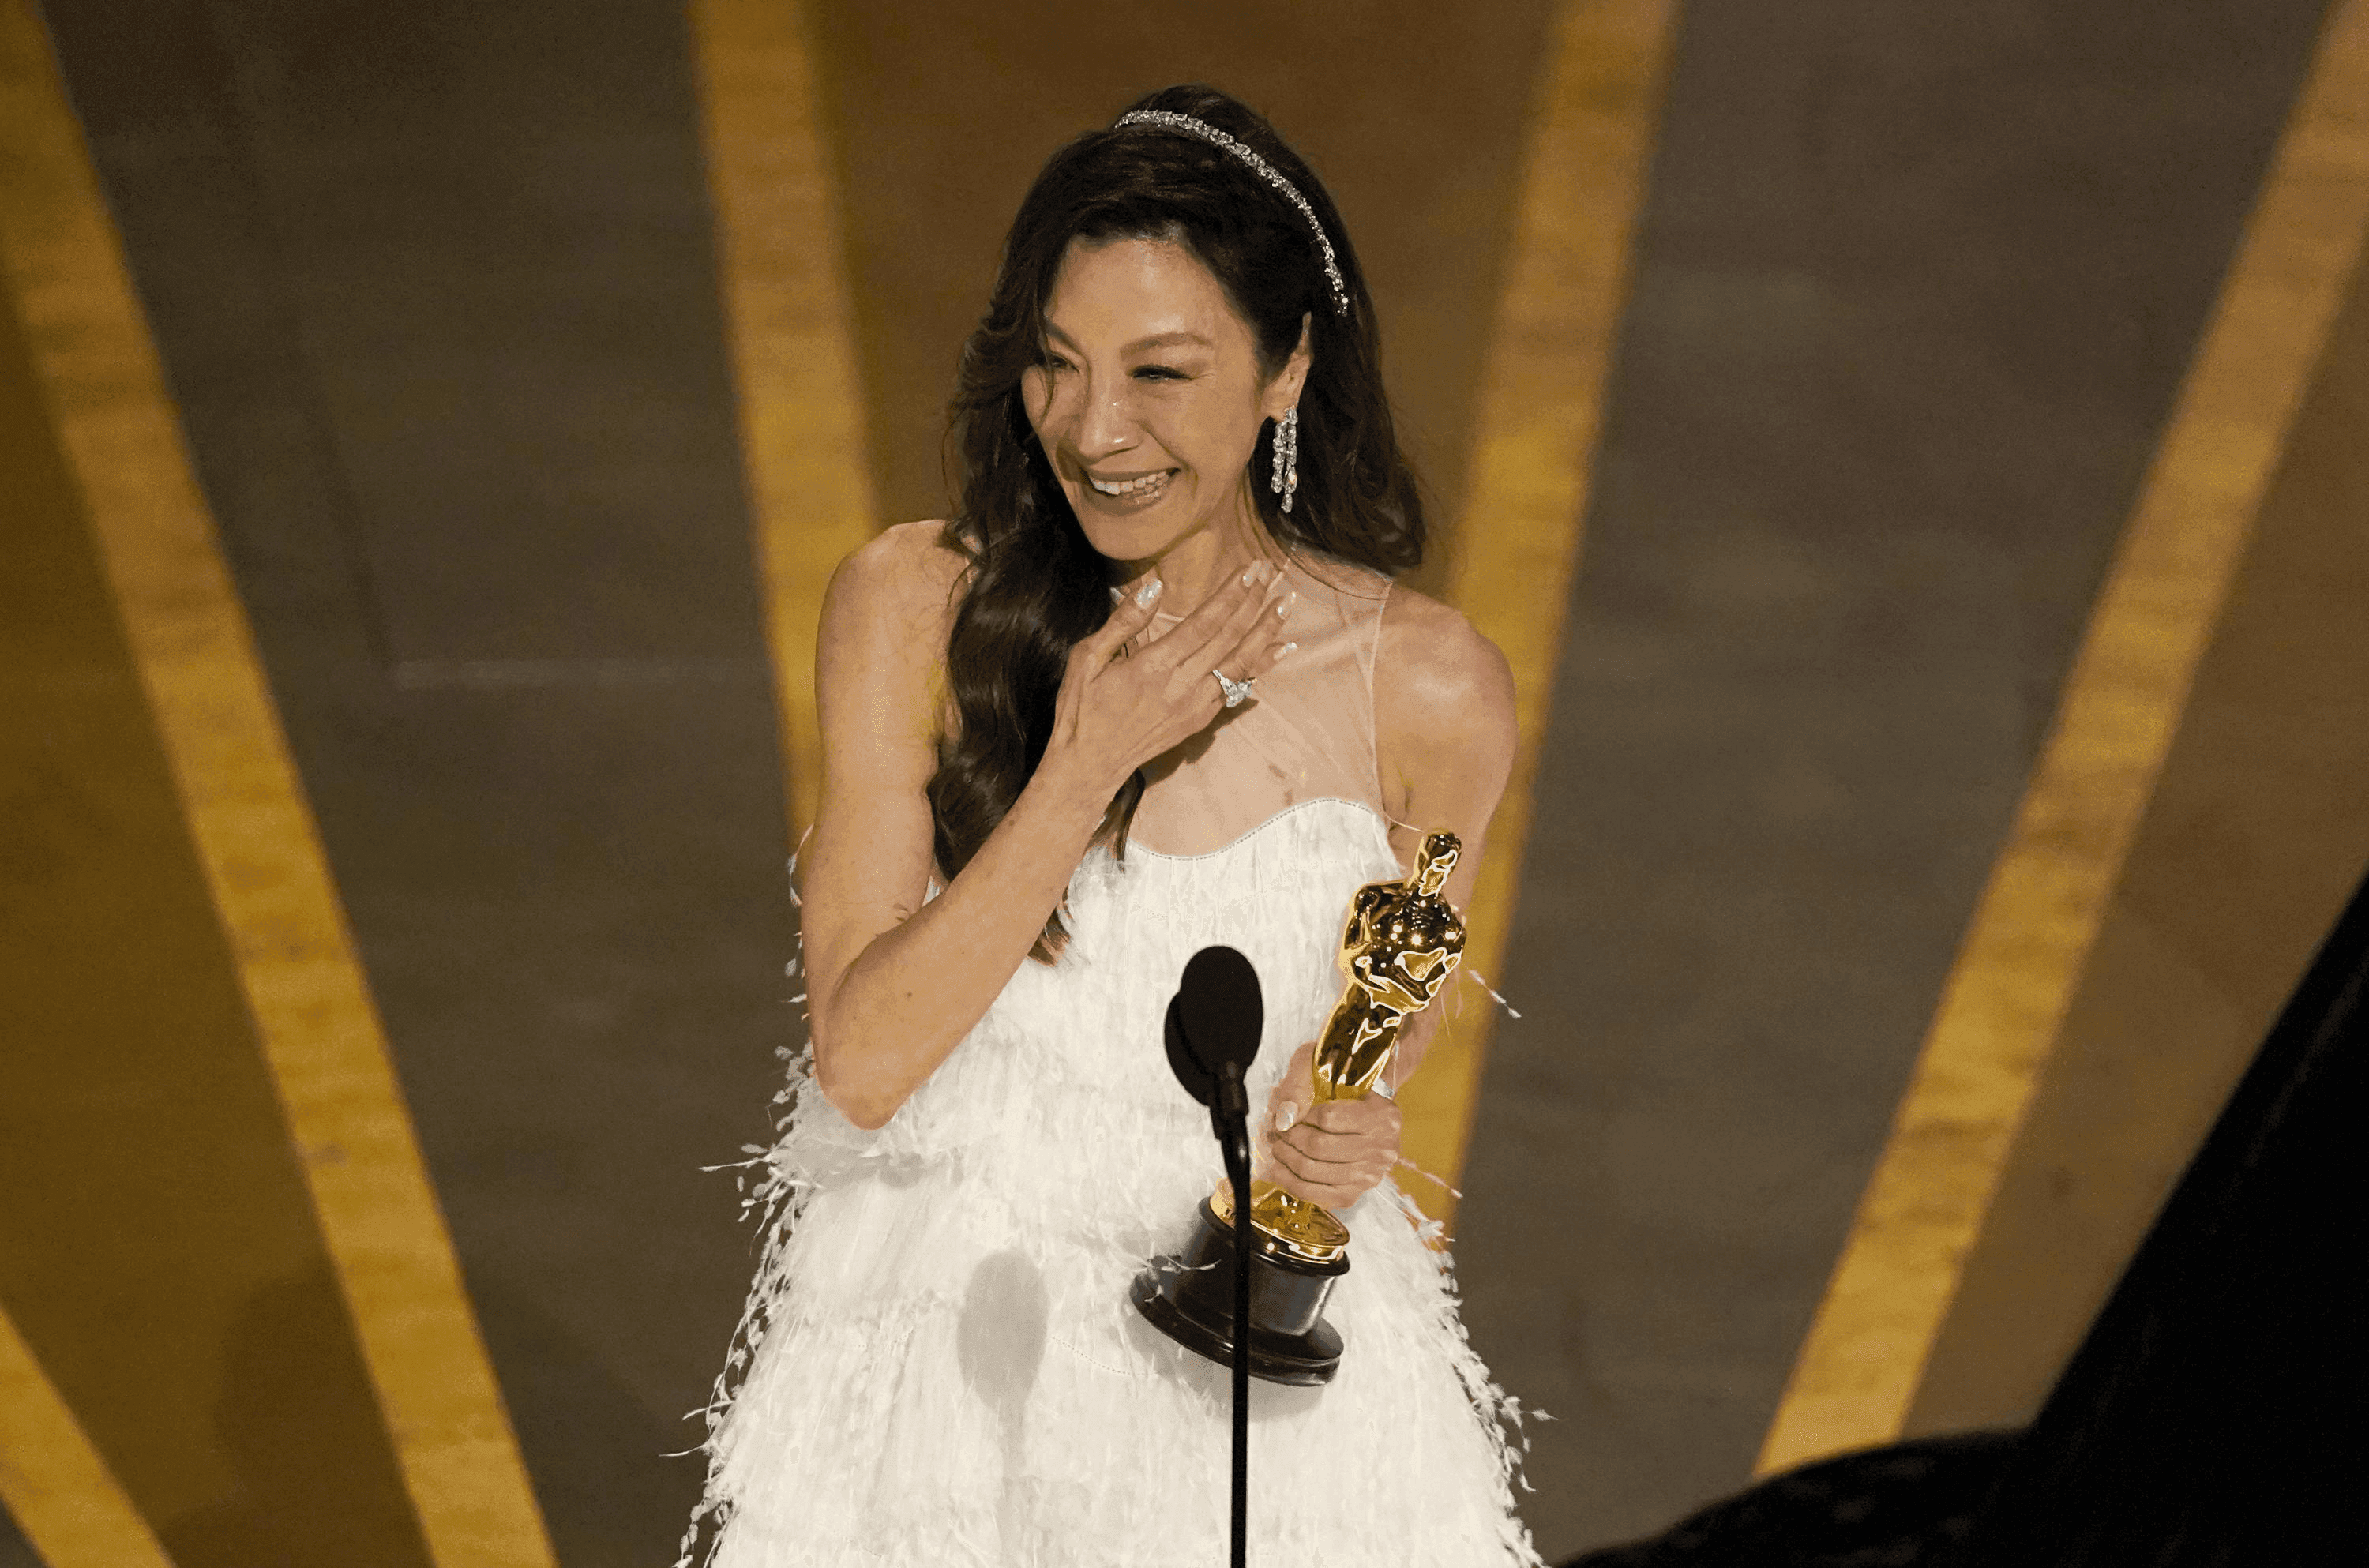 Michelle Yeoh stands in front of a microphone holding an Oscar during her acceptance speech at the 95th Academy Awards.